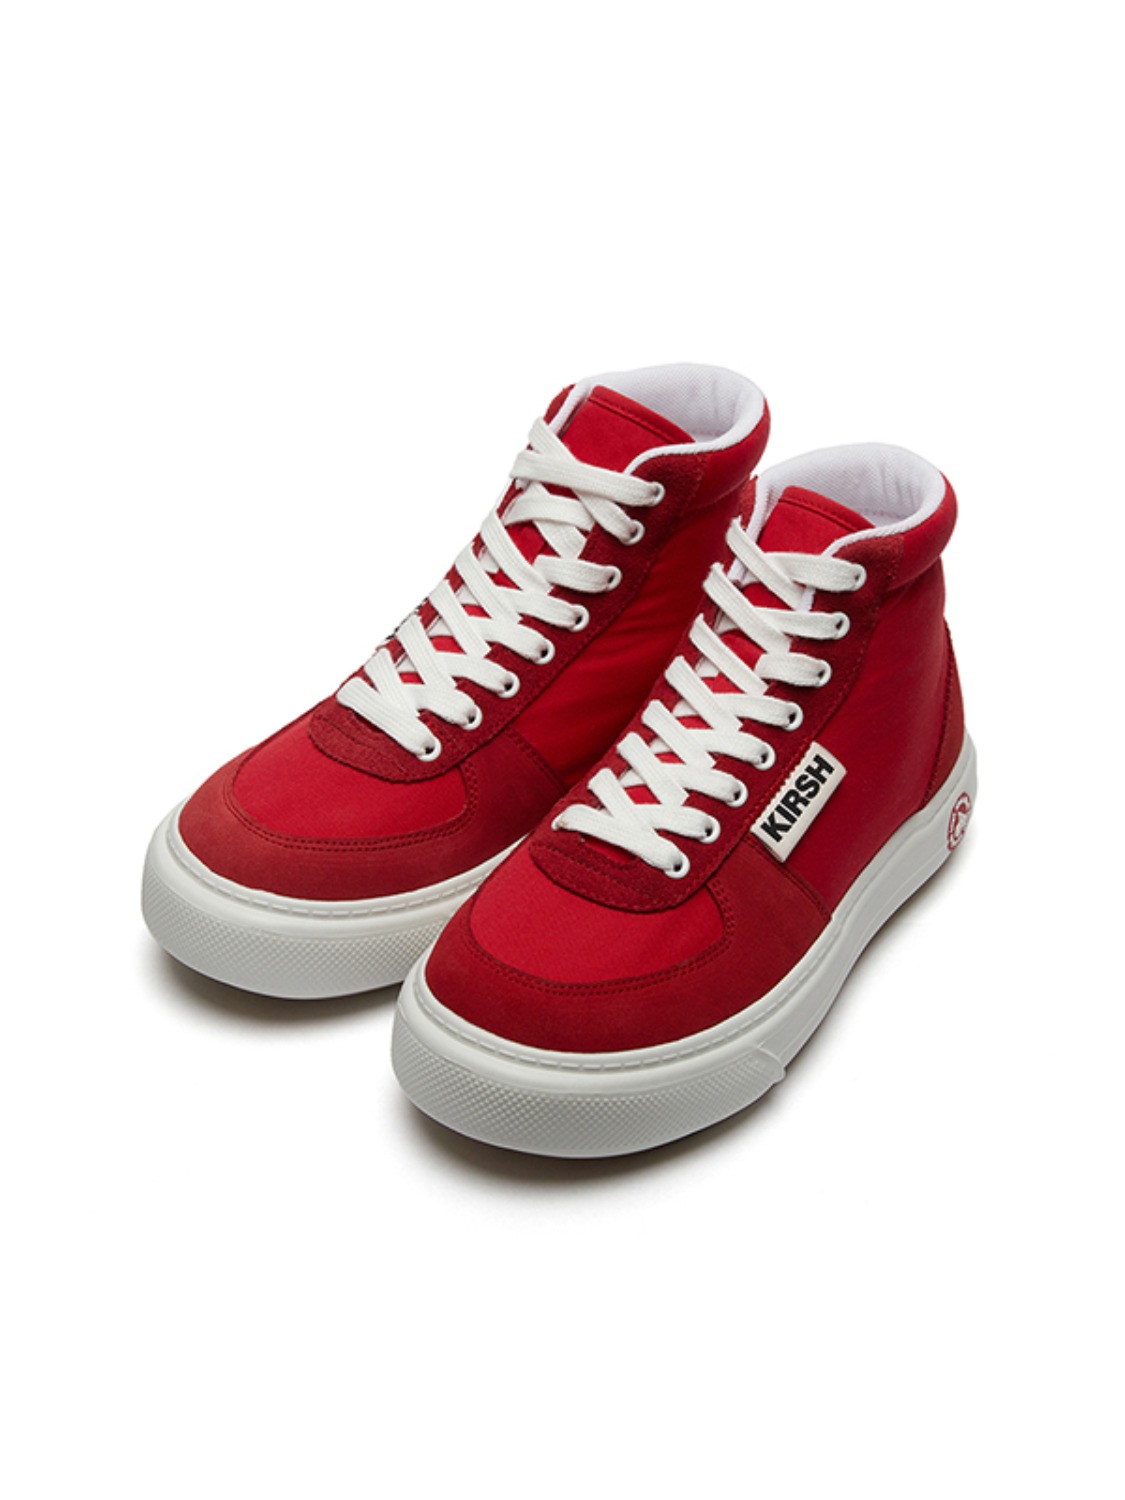 KIRSH SHOES HIGH [RED]